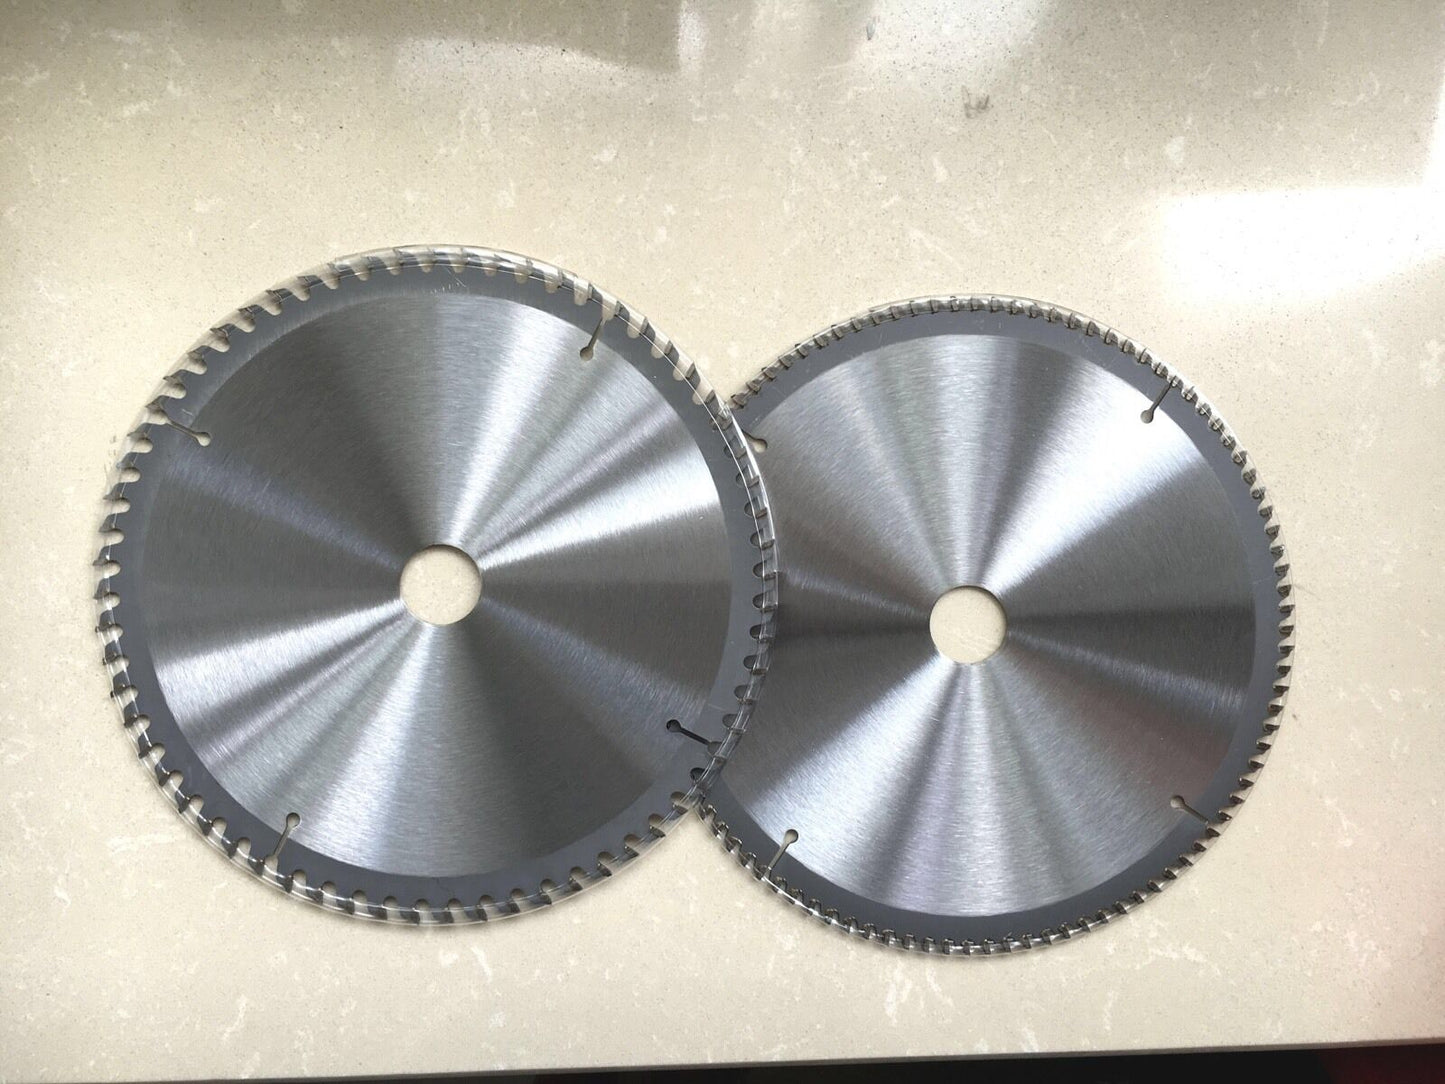 2PC Circular Saw Blade 255mm 100T FOR ALUMINIUM 64T FOR TIMBER 30MM BORE